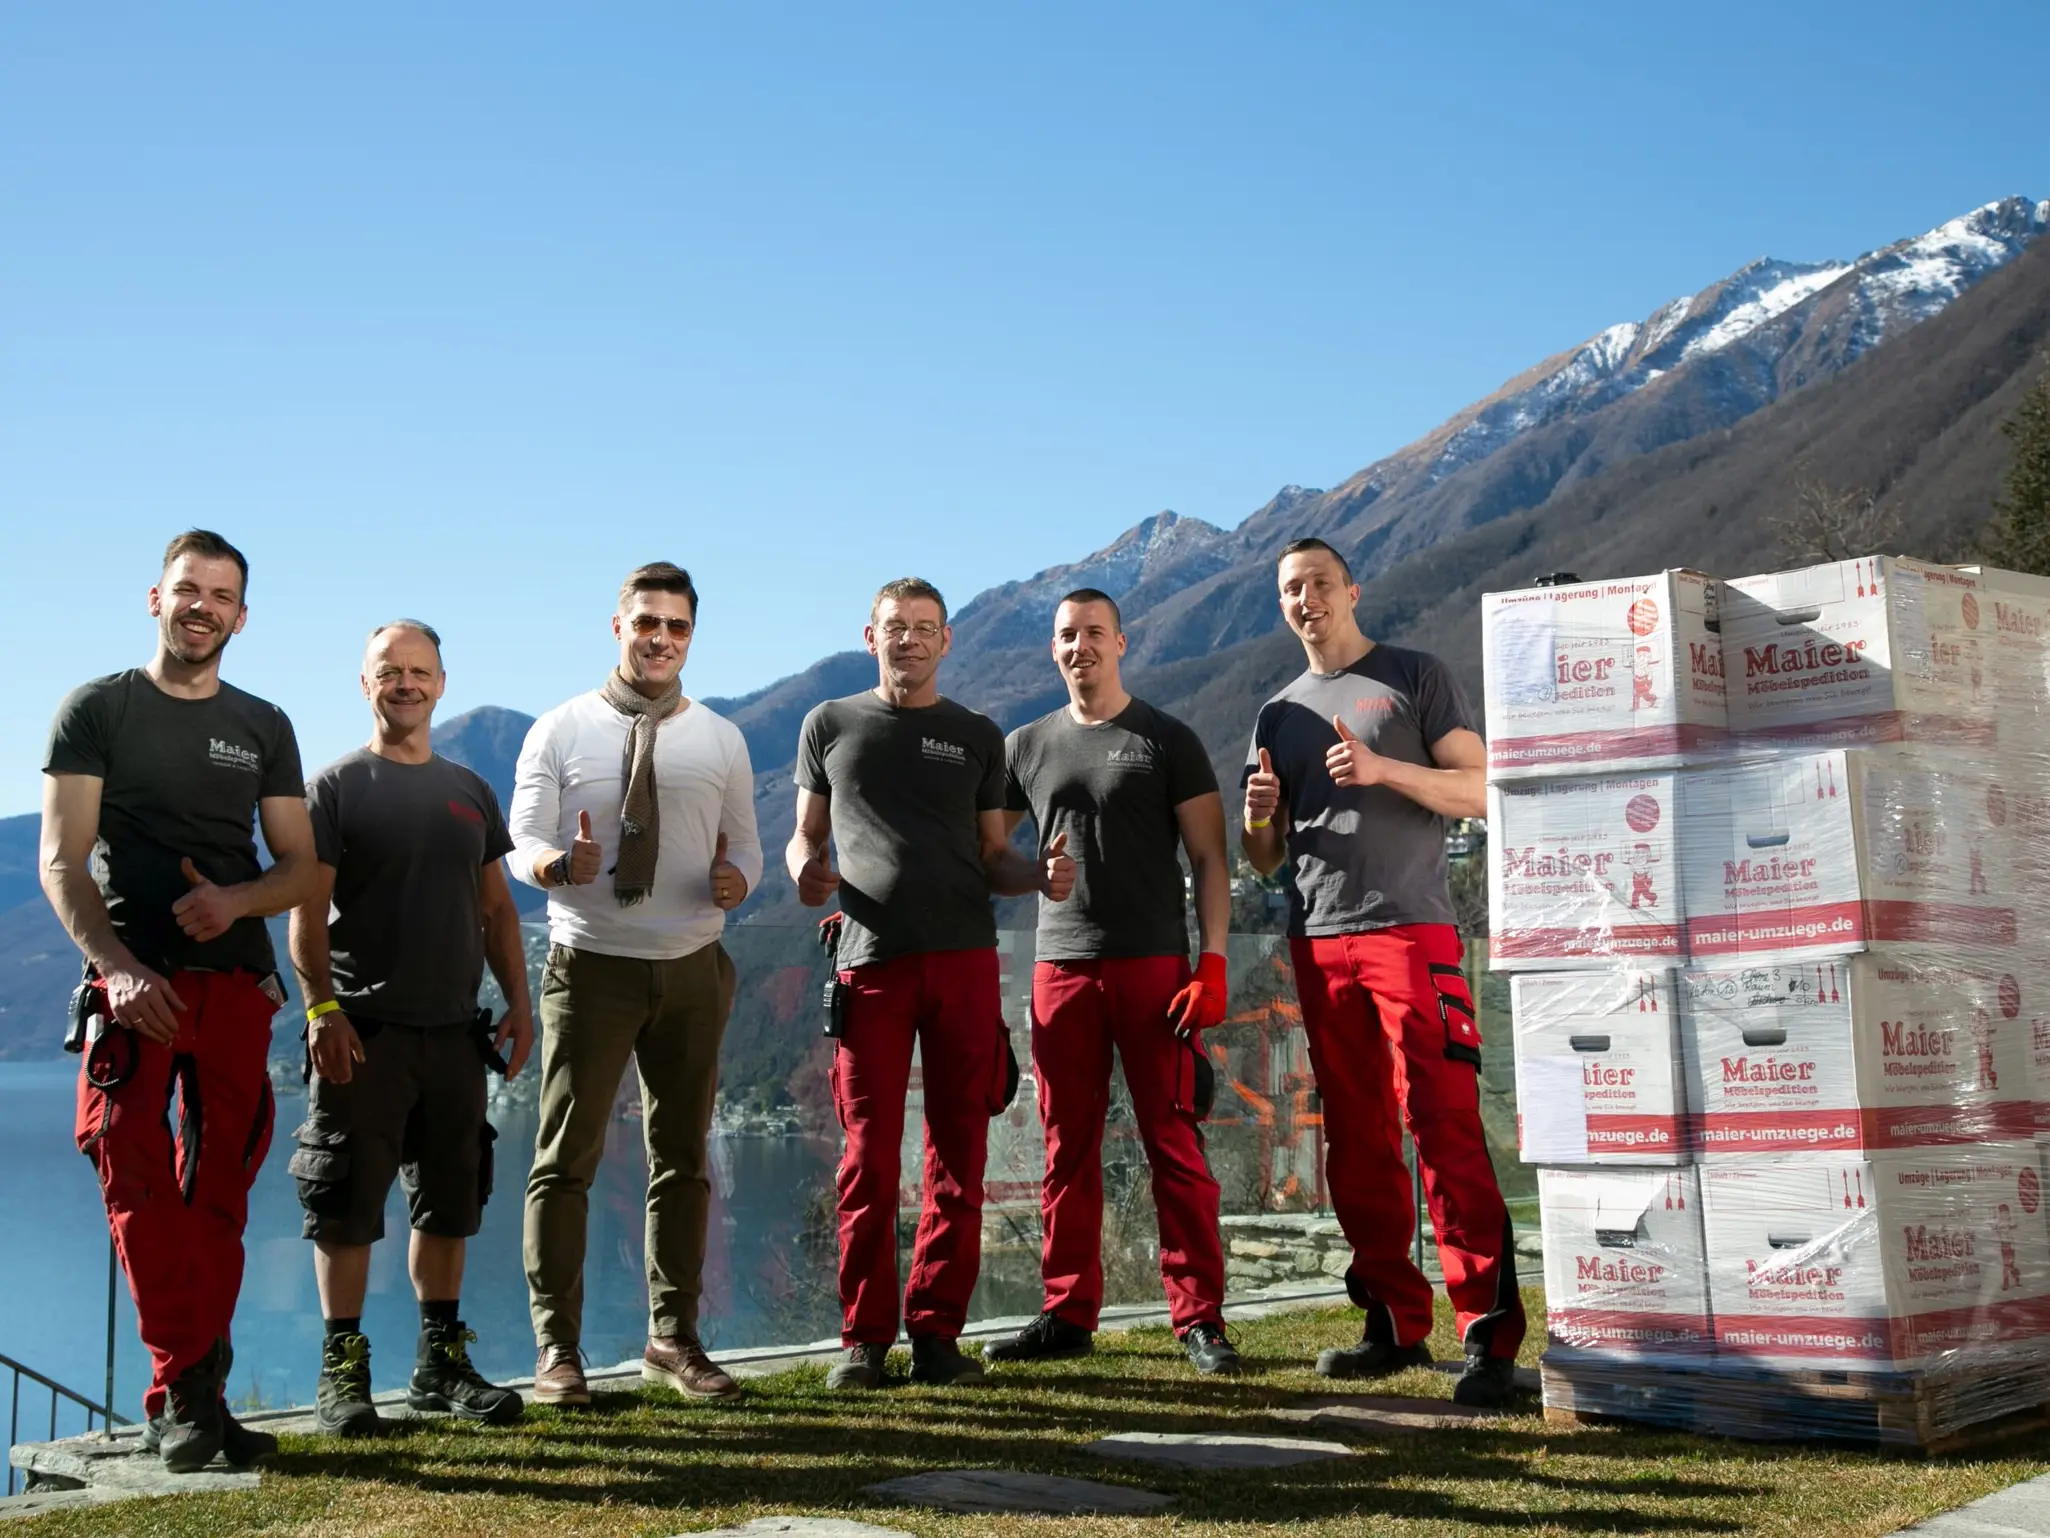 A group of smiling workers from Möbelspedition Maier stand proudly in work clothes with their customer in front of a large stock of moving boxes, with a picturesque mountain landscape in the background.